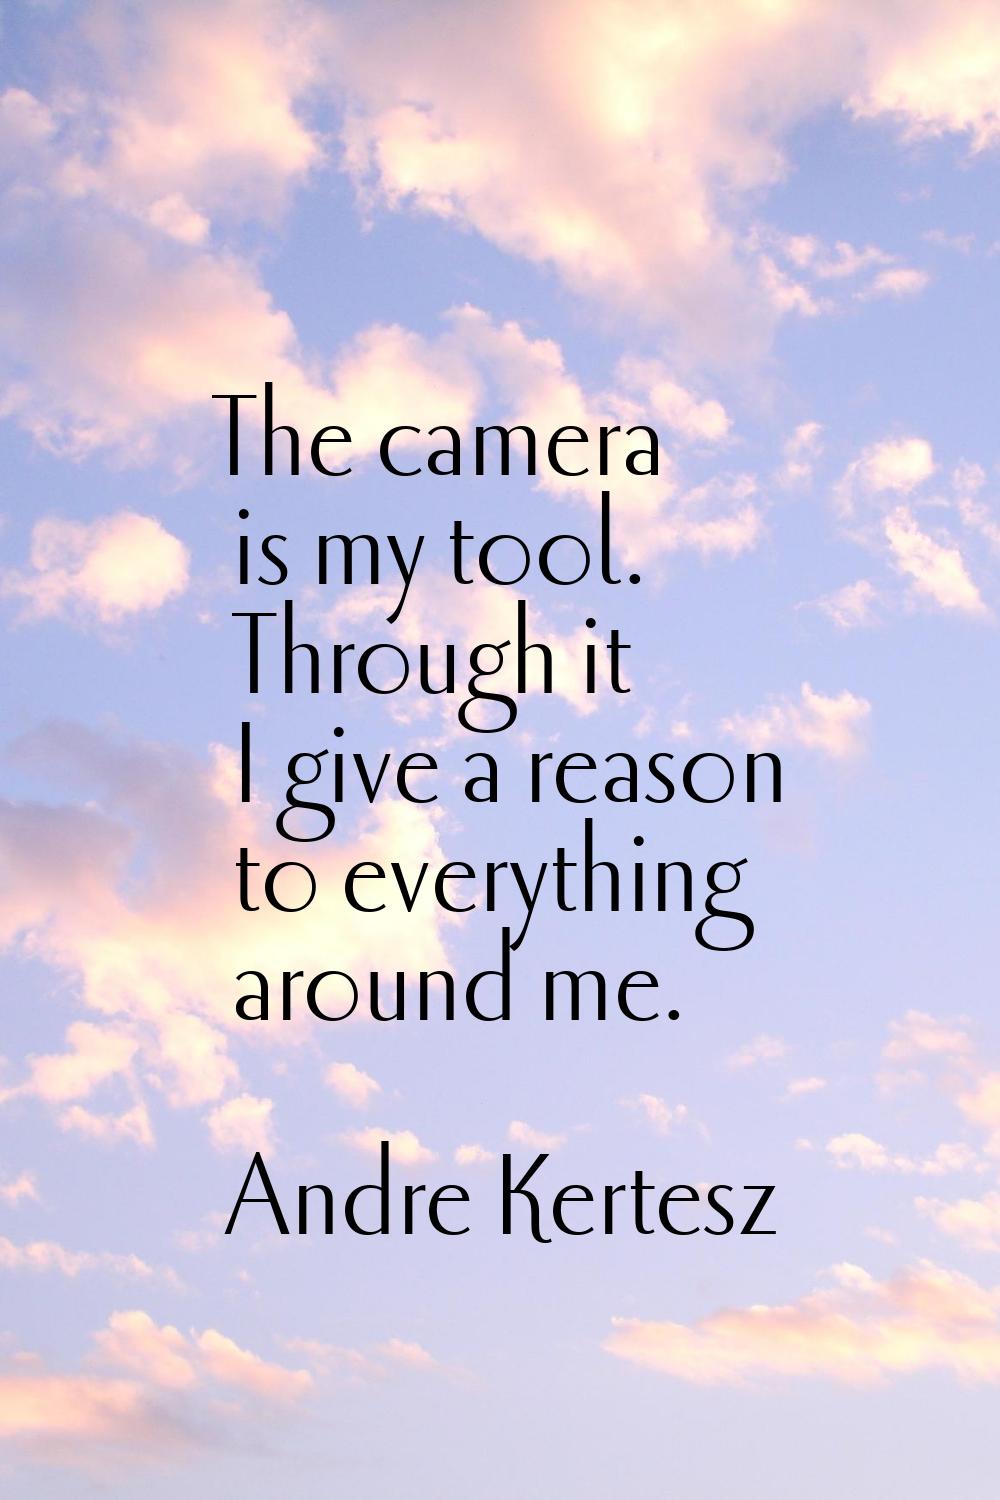 The camera is my tool. Through it I give a reason to everything around me.